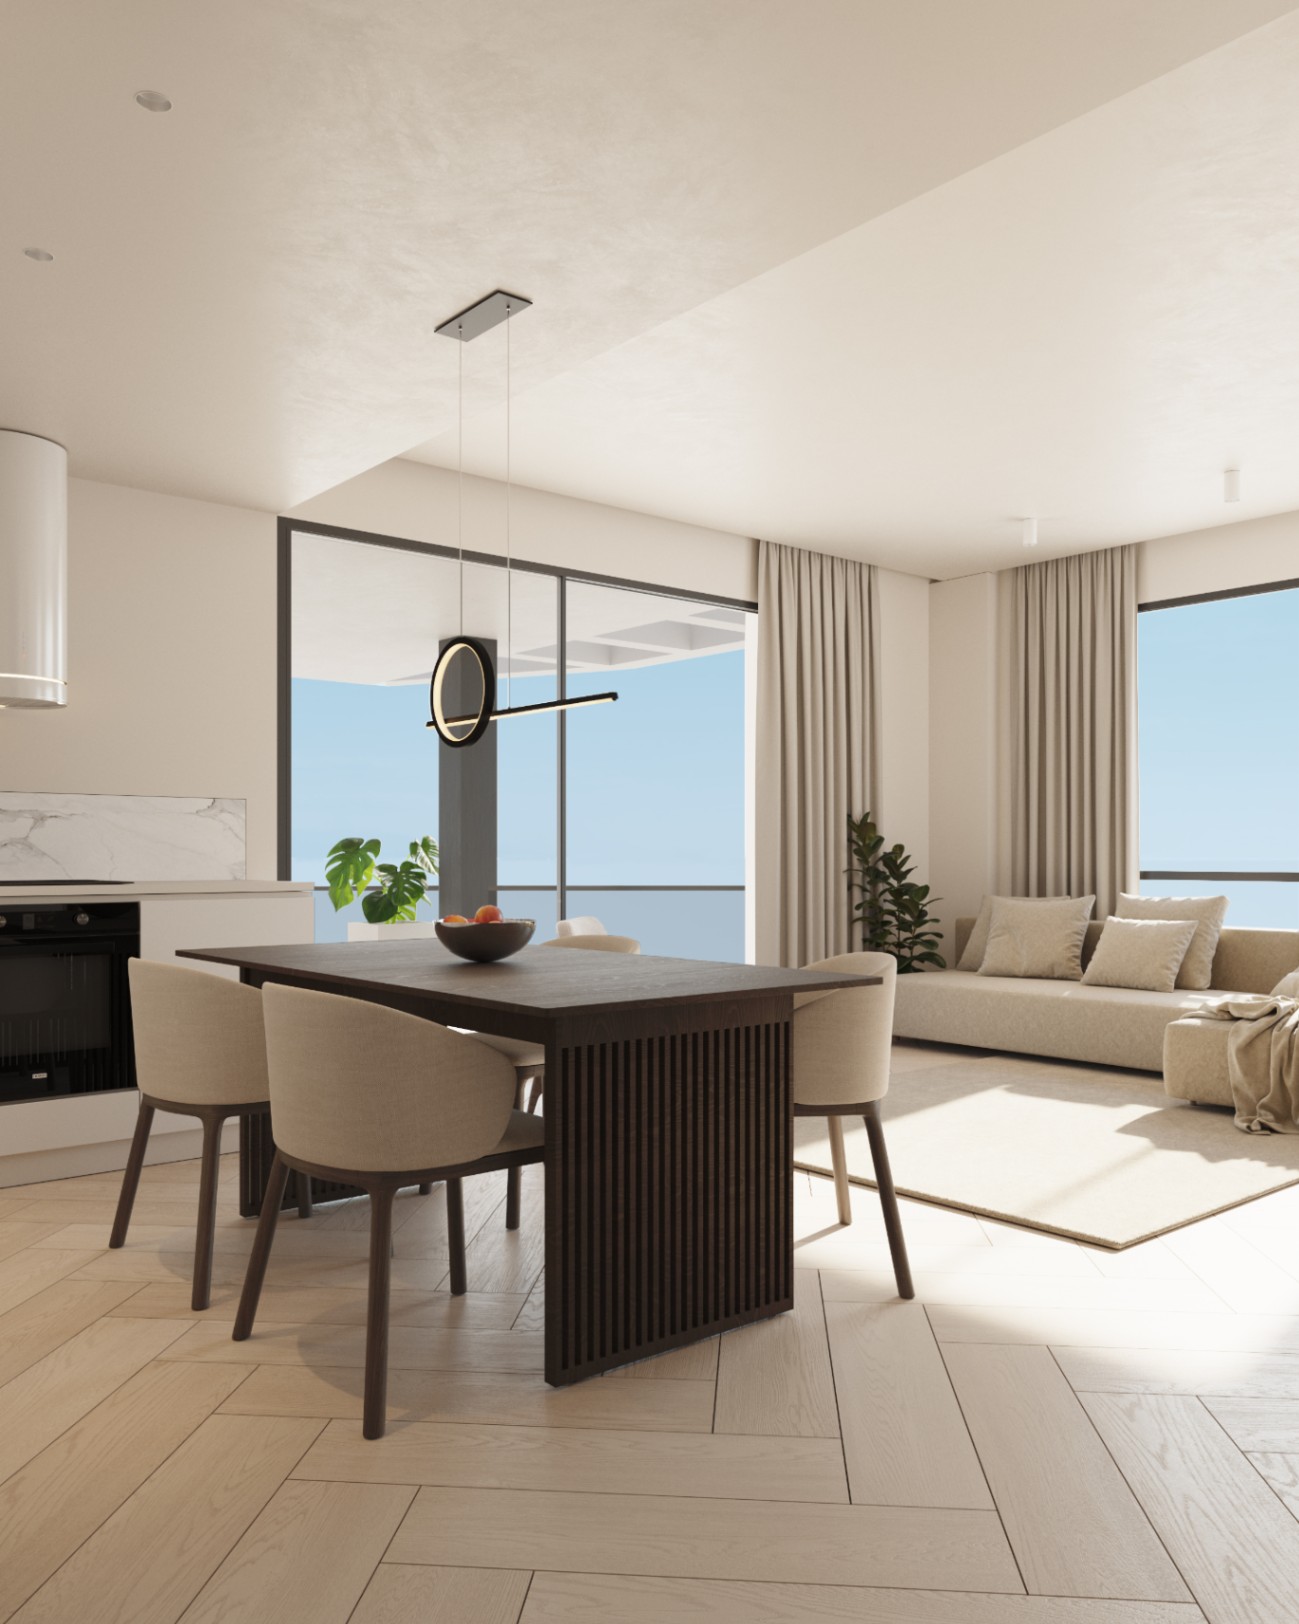 New build apartment with sea views for sale in Calpe